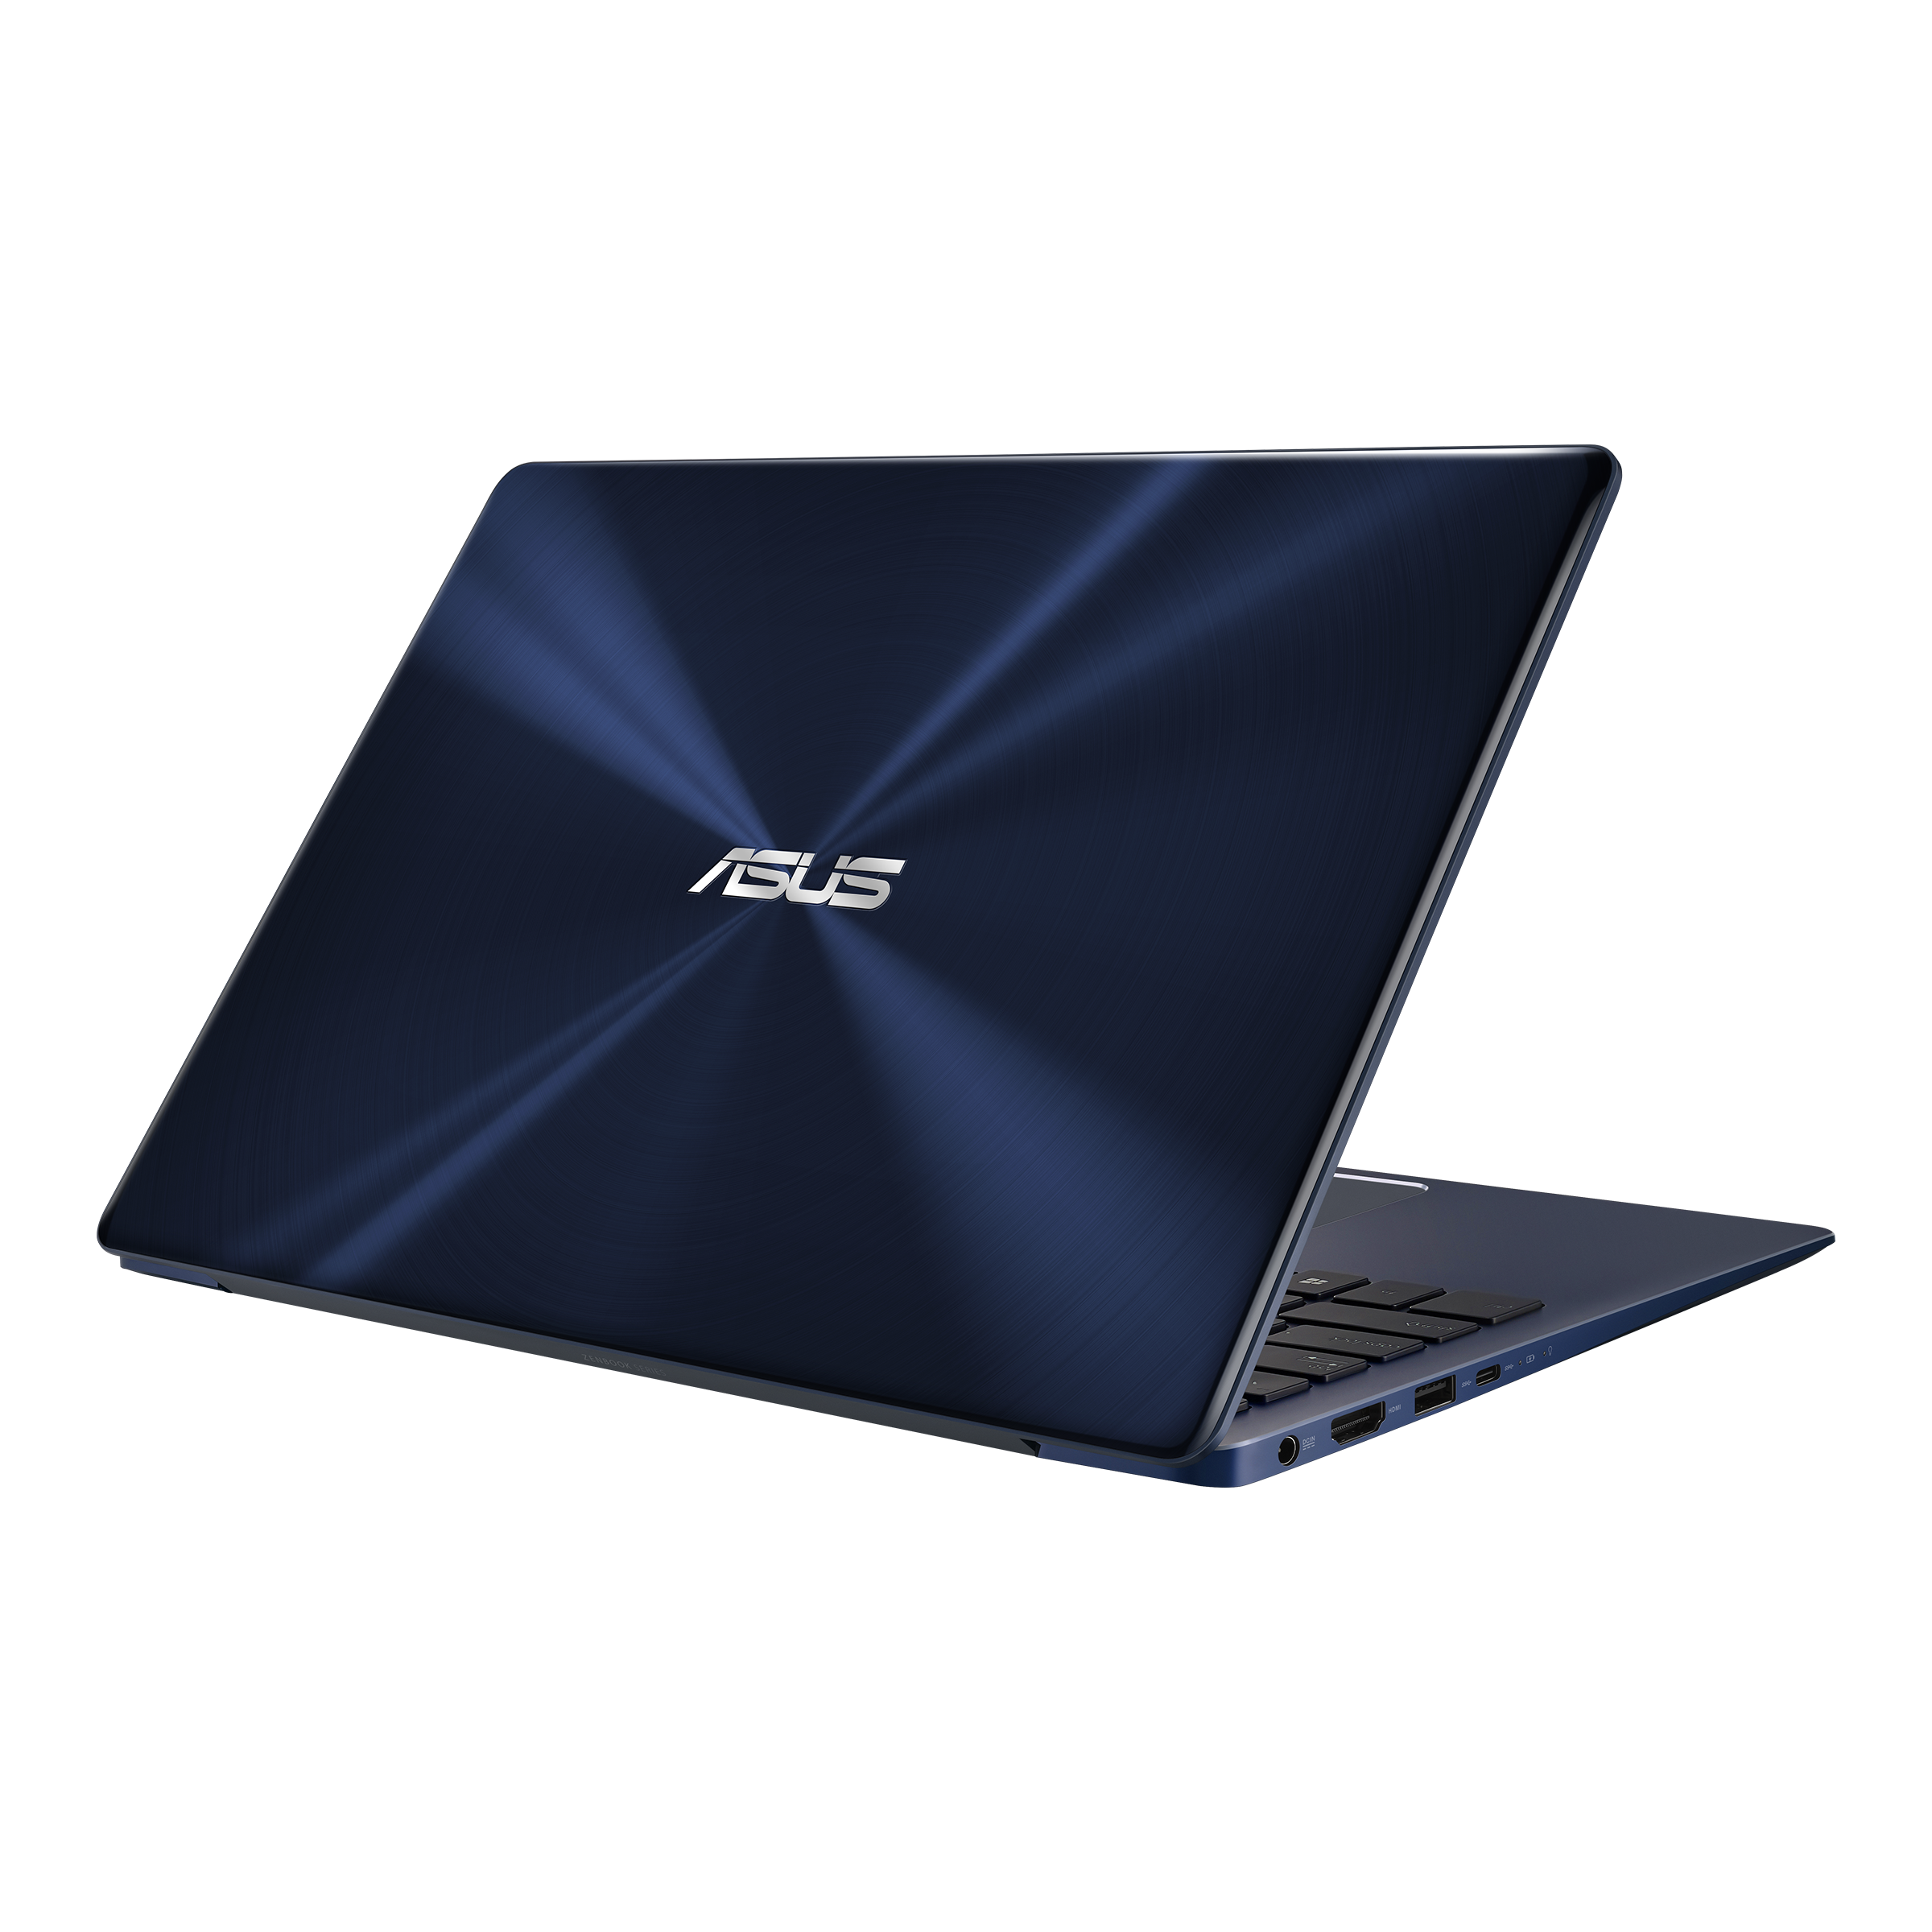 ASUS Zenbook 13 UX331｜Laptops For Home｜ASUS USA